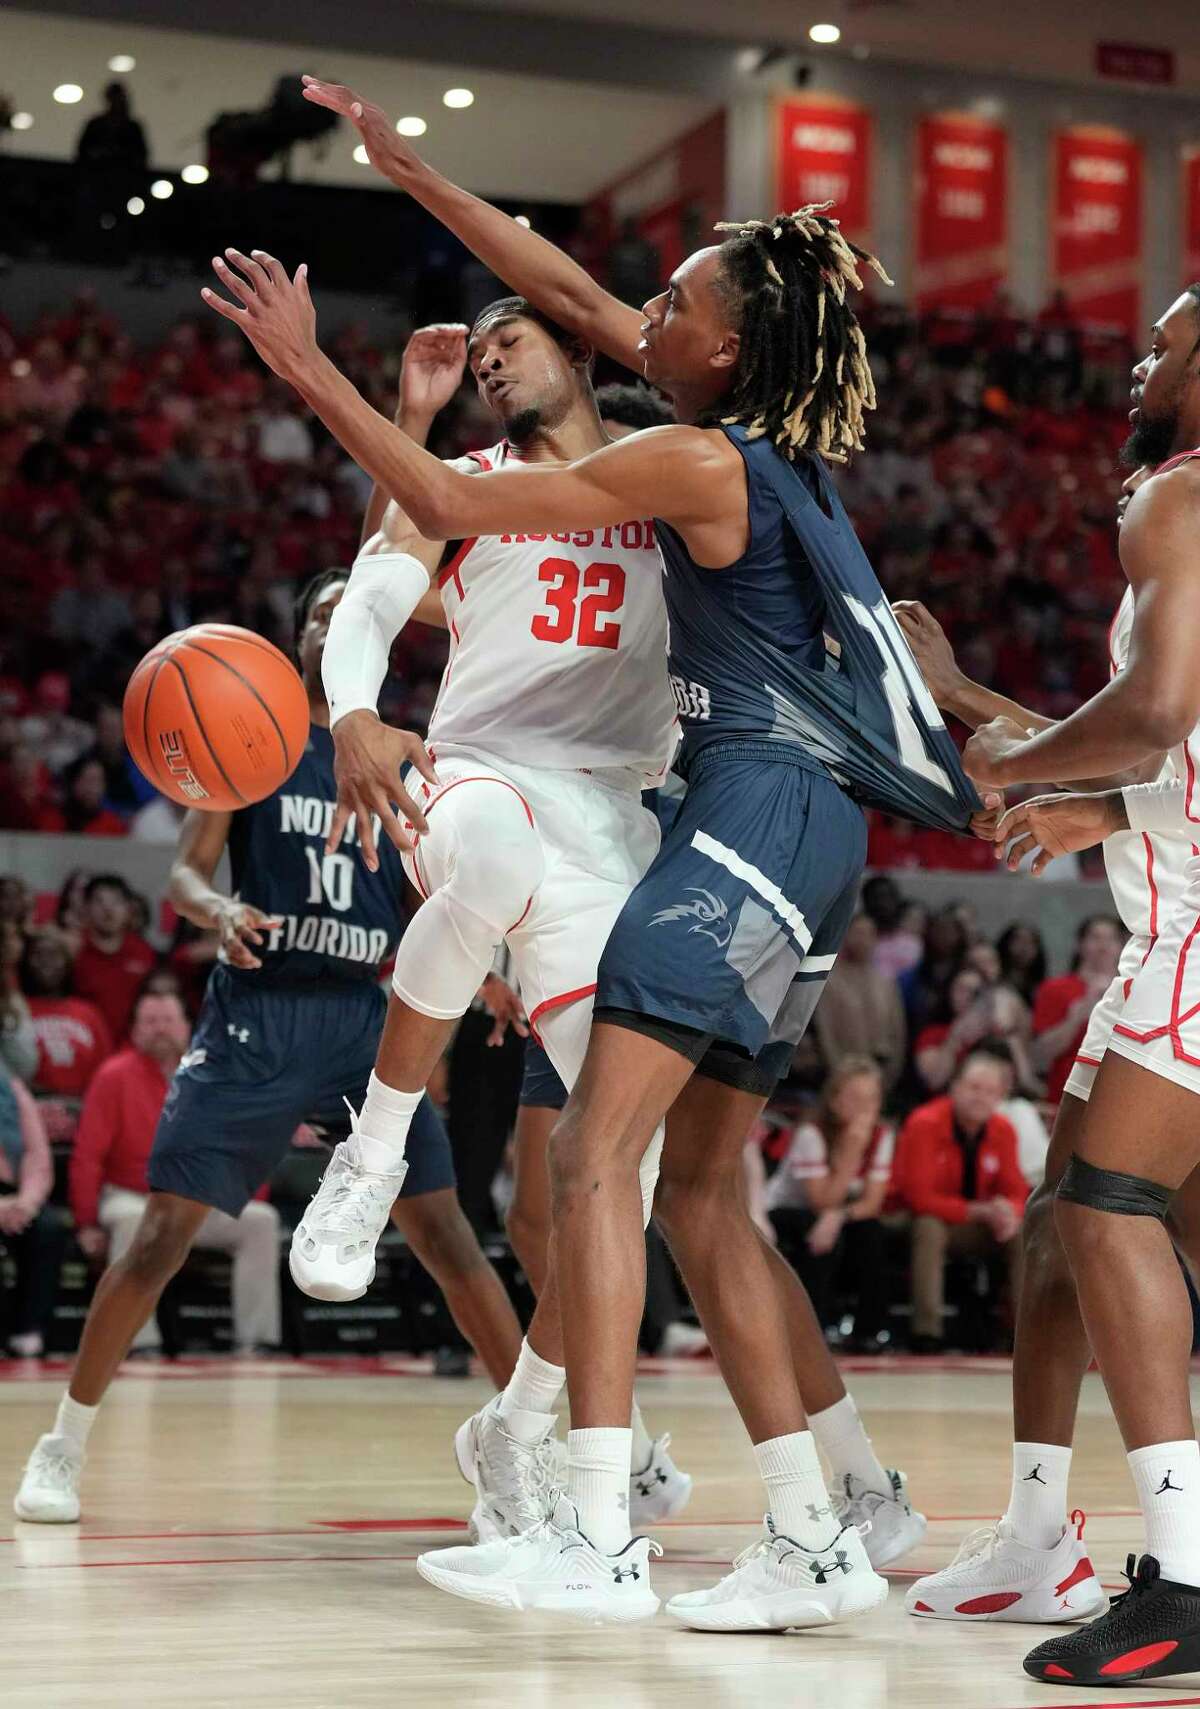 Houston Cougars forward Reggie Chaney (32) battles with North Florida Ospreys forward Jadyn Parker (24) during the first half of an NCAA men’s basketball game at the Fertitta Center on Tuesday, Dec. 6, 2022 in Houston.